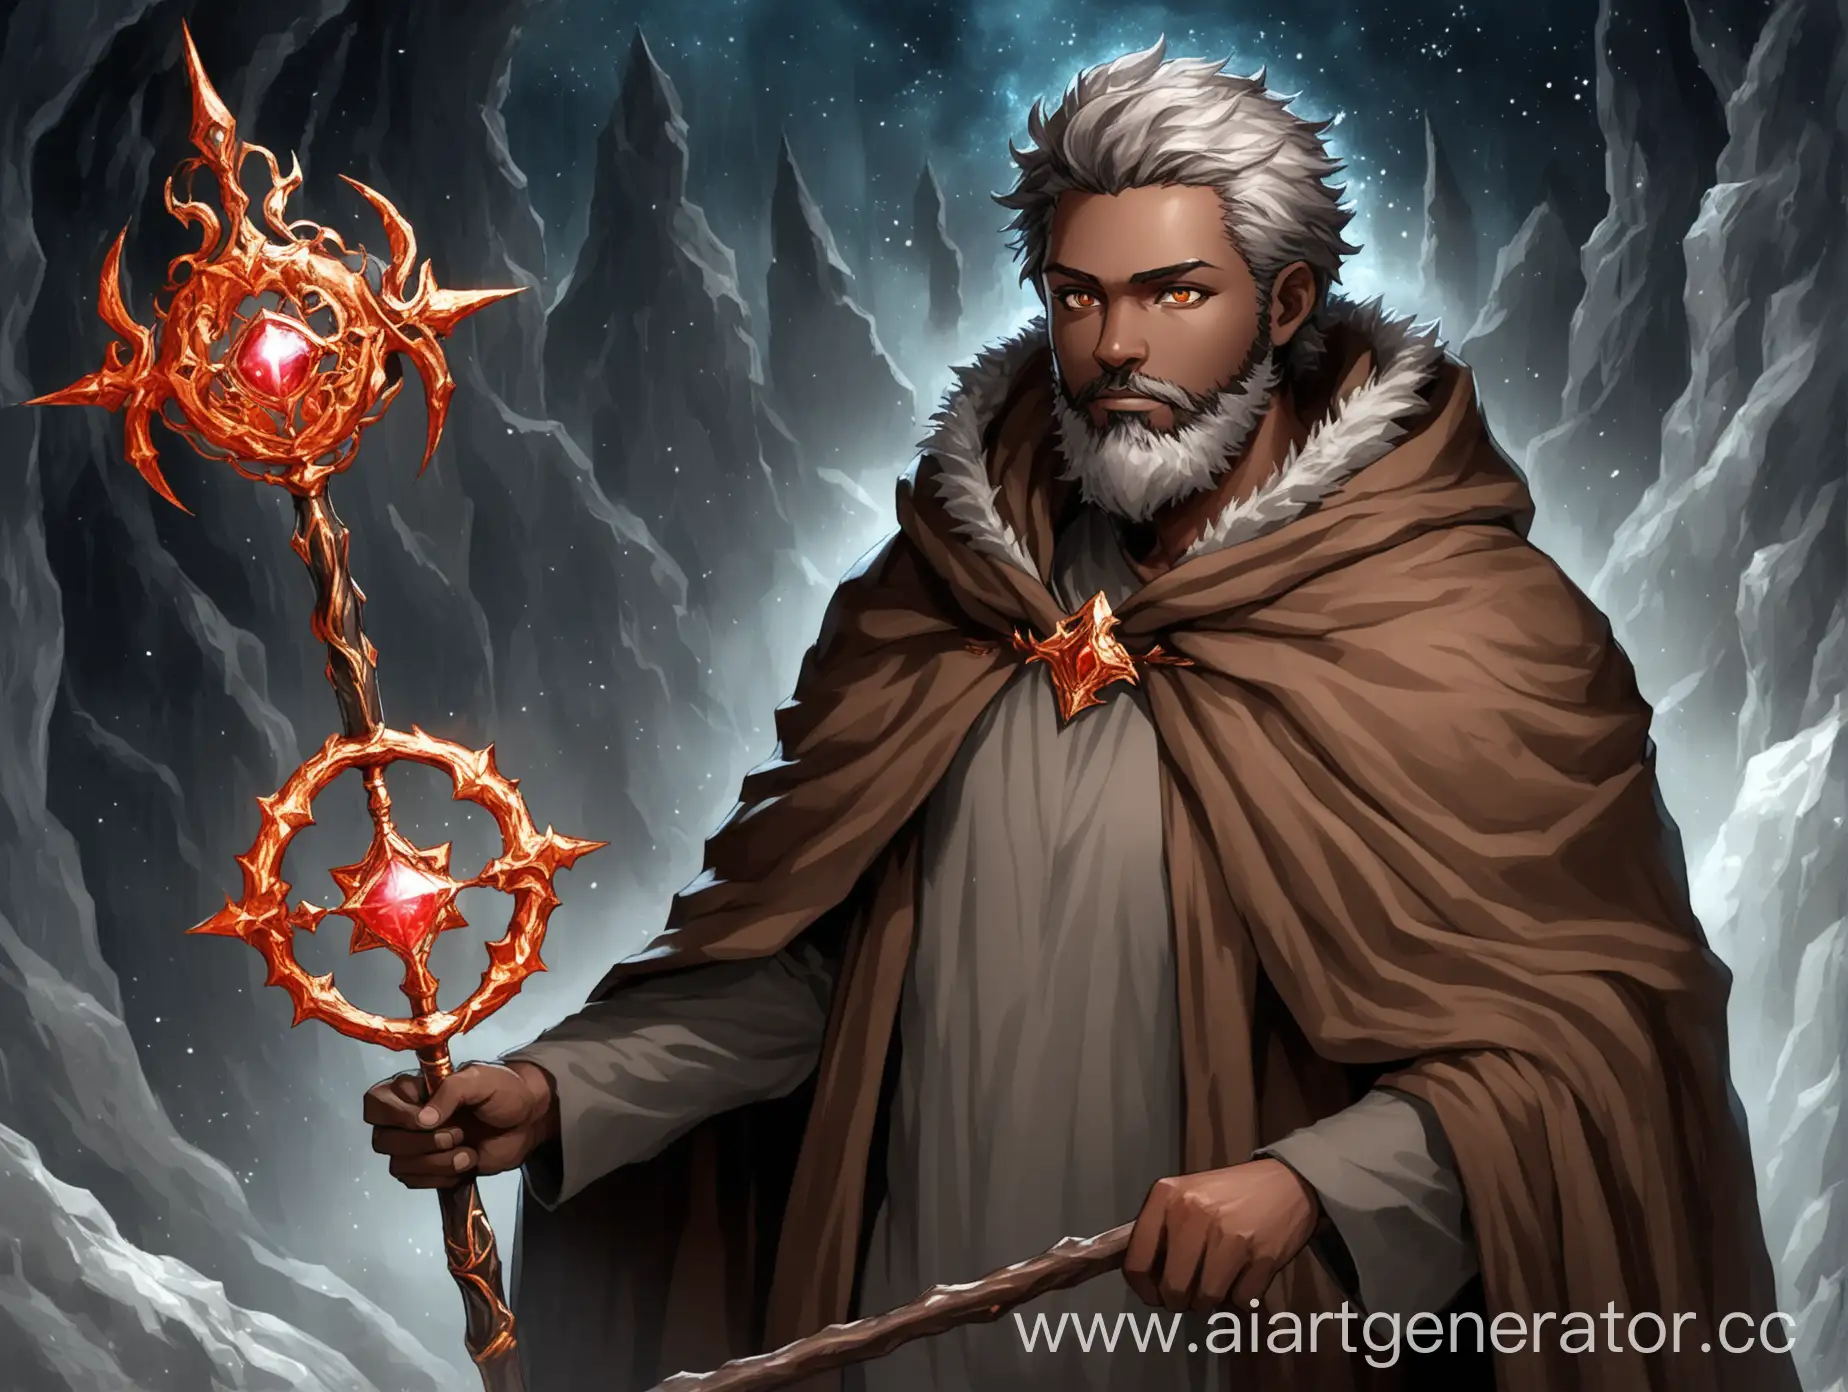 Mystical-Sorcerer-with-Swarthy-Skin-and-Ashy-Hair-Wielding-a-Magical-Staff